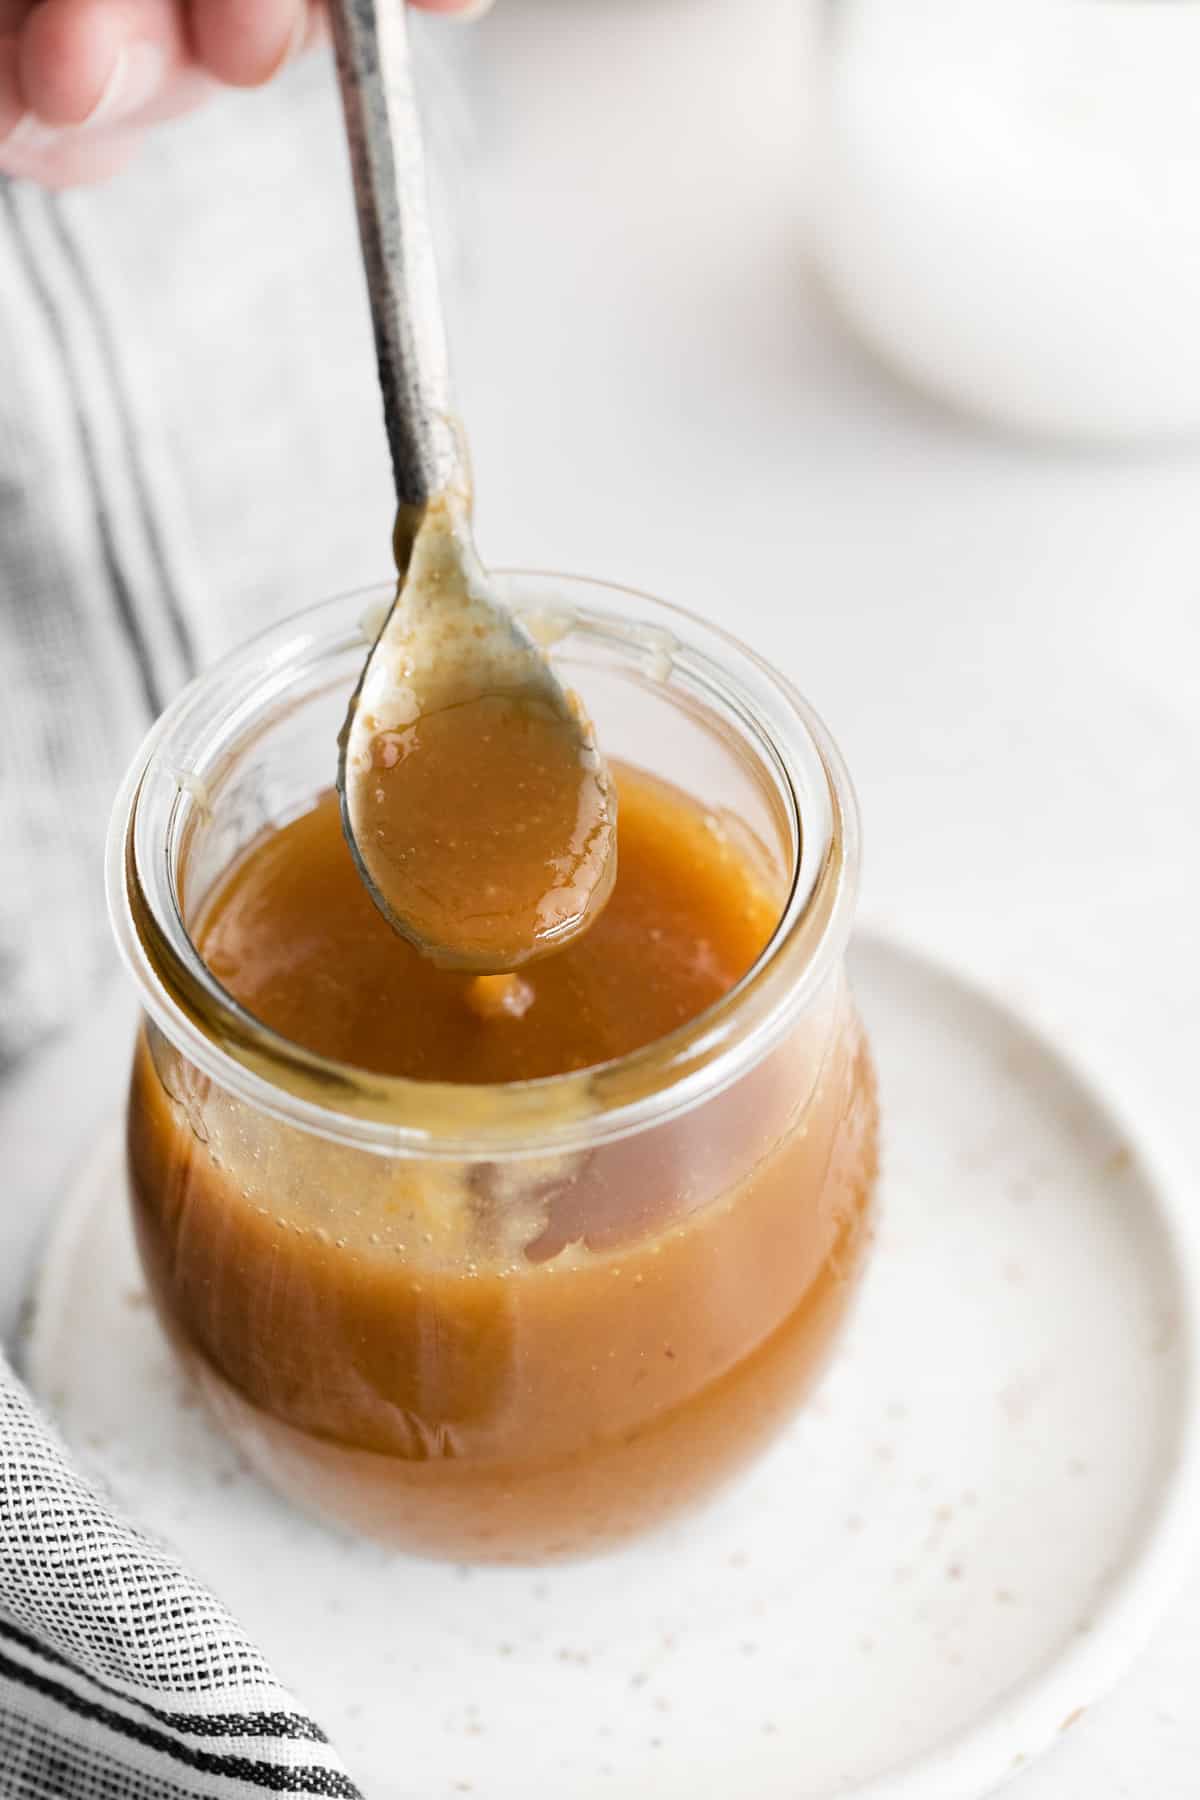 Caramel on a spoon to show texture.